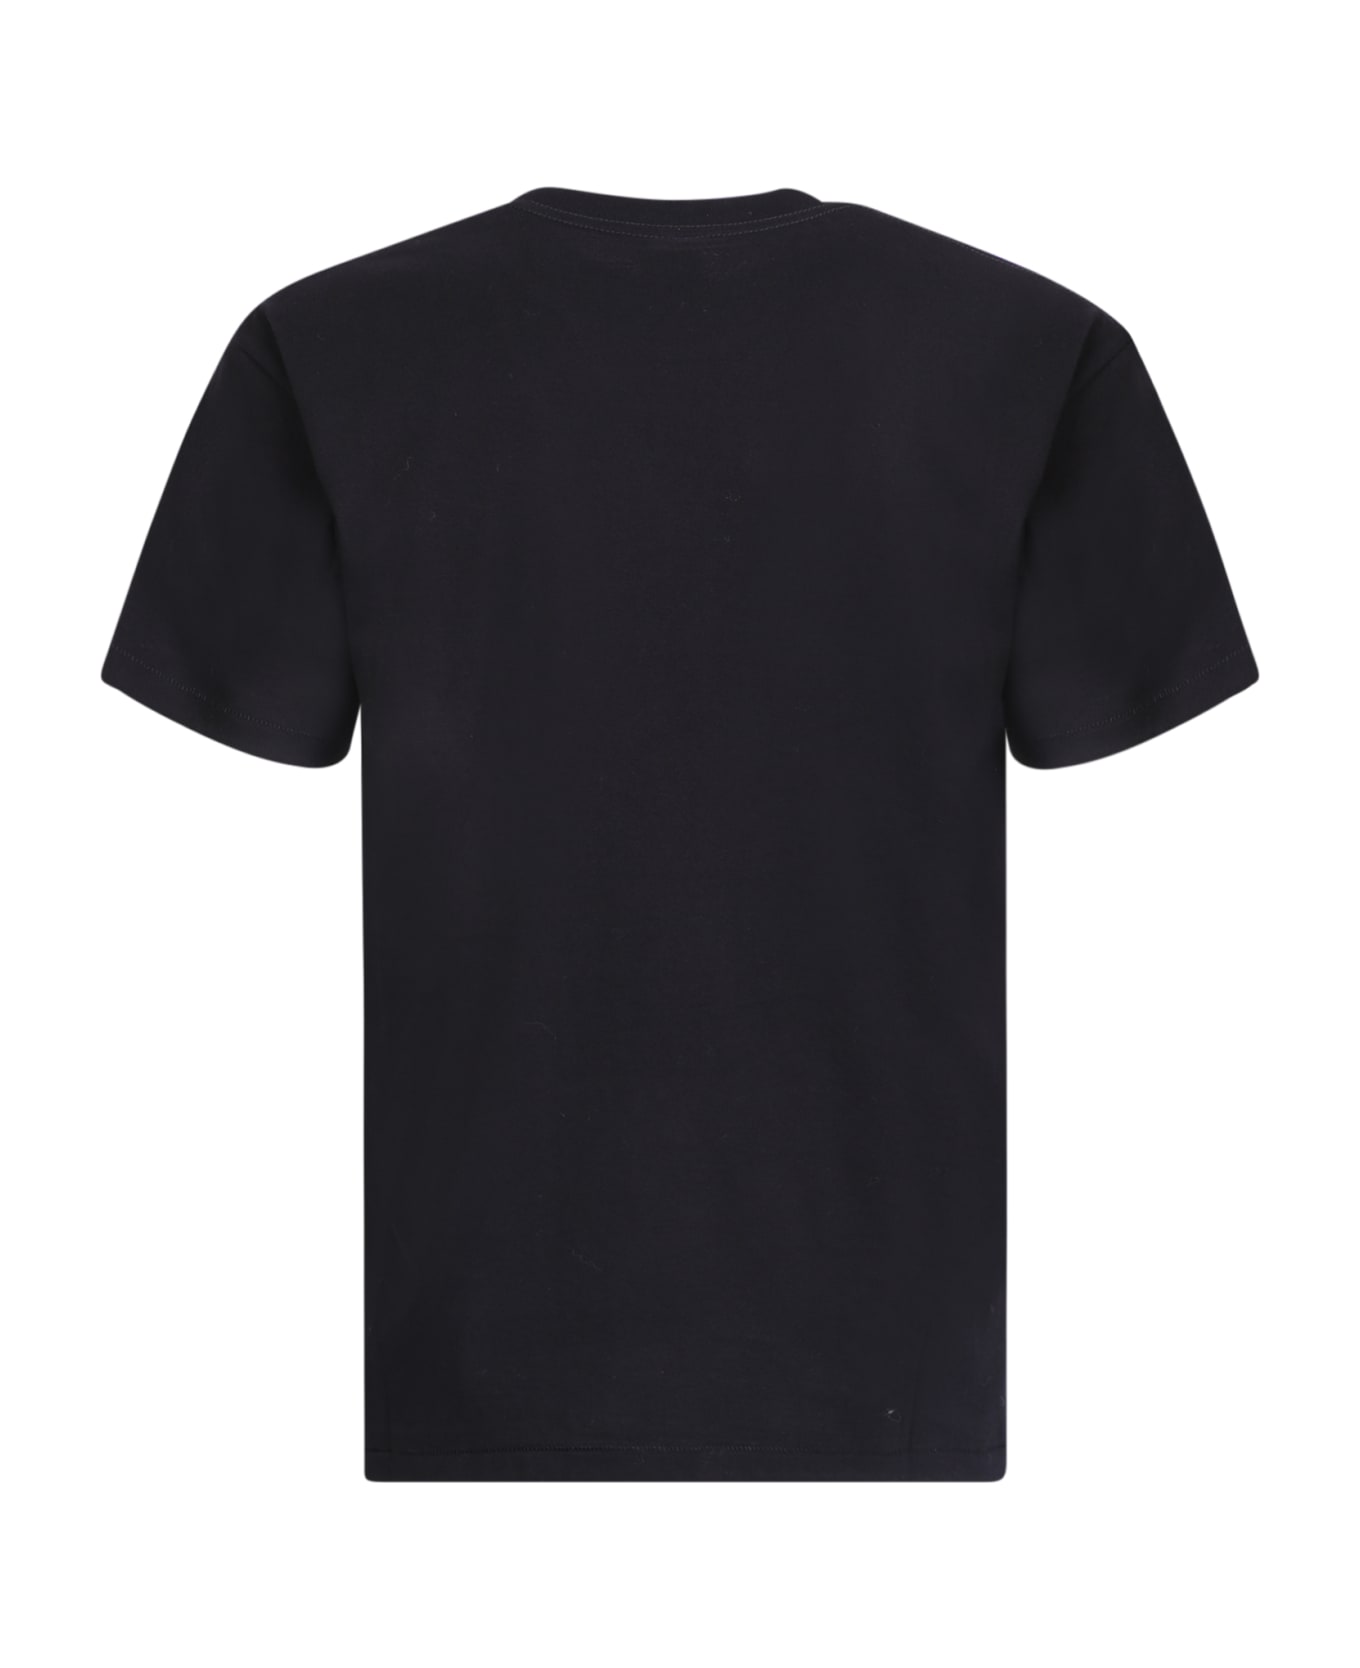 The Salvages Voyager N.4 T-shirt - Black